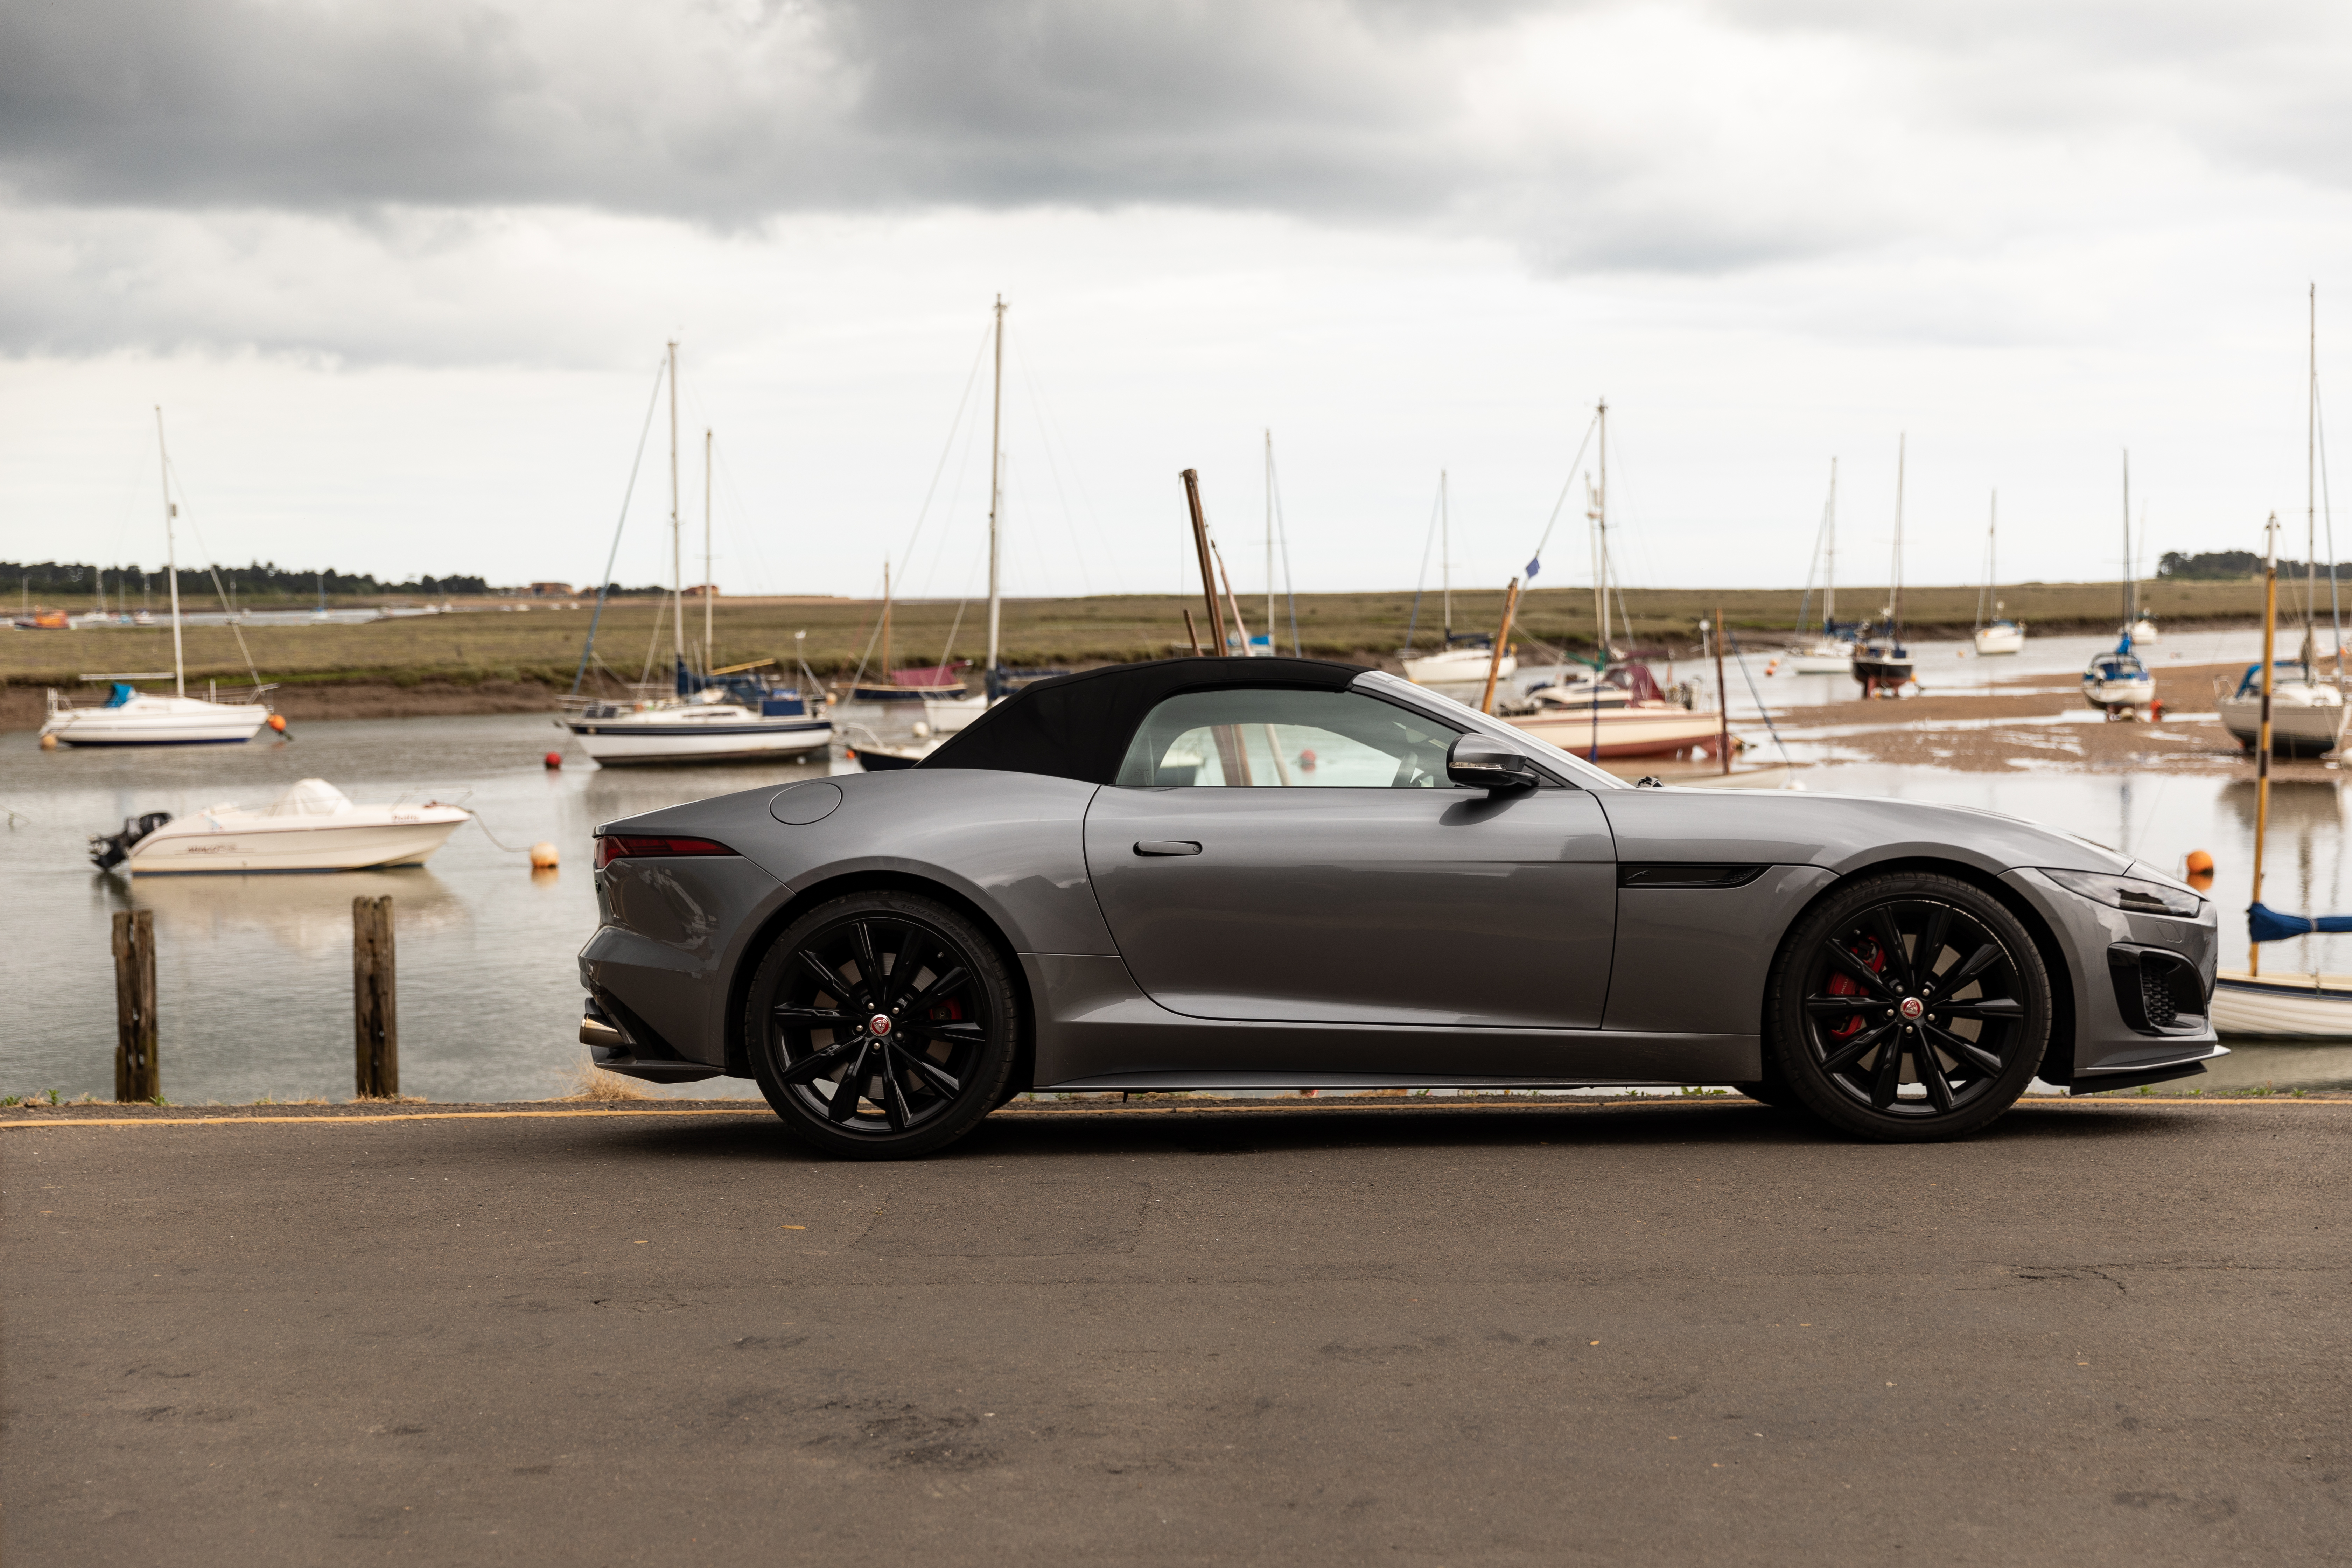 5 THINGS WE LOVE ABOUT THE JAGUAR F-TYPE CONVERTIBLE